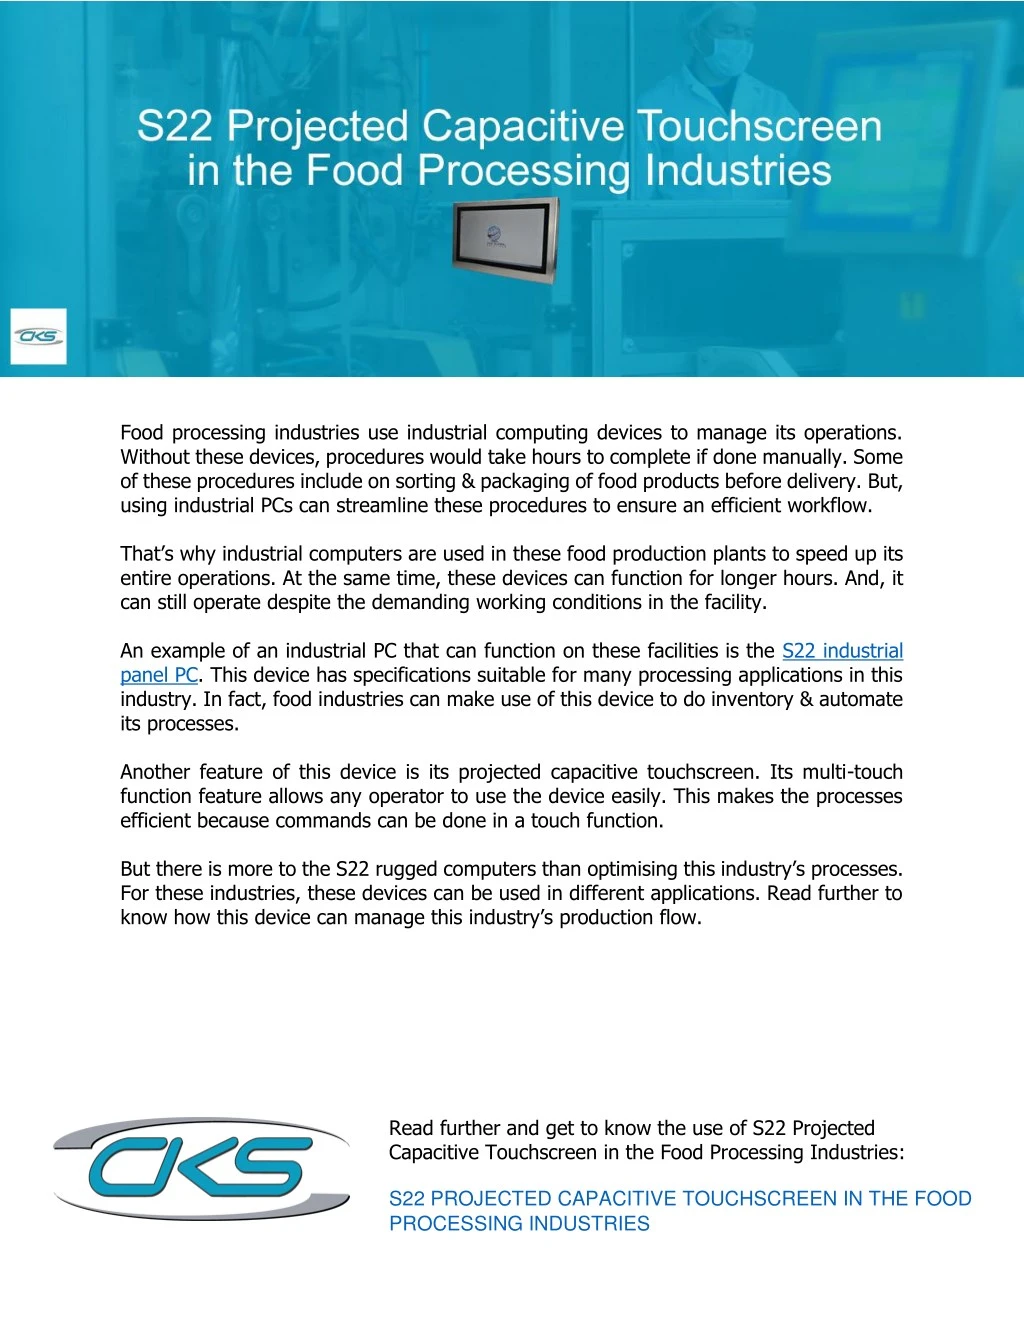 food processing industries use industrial